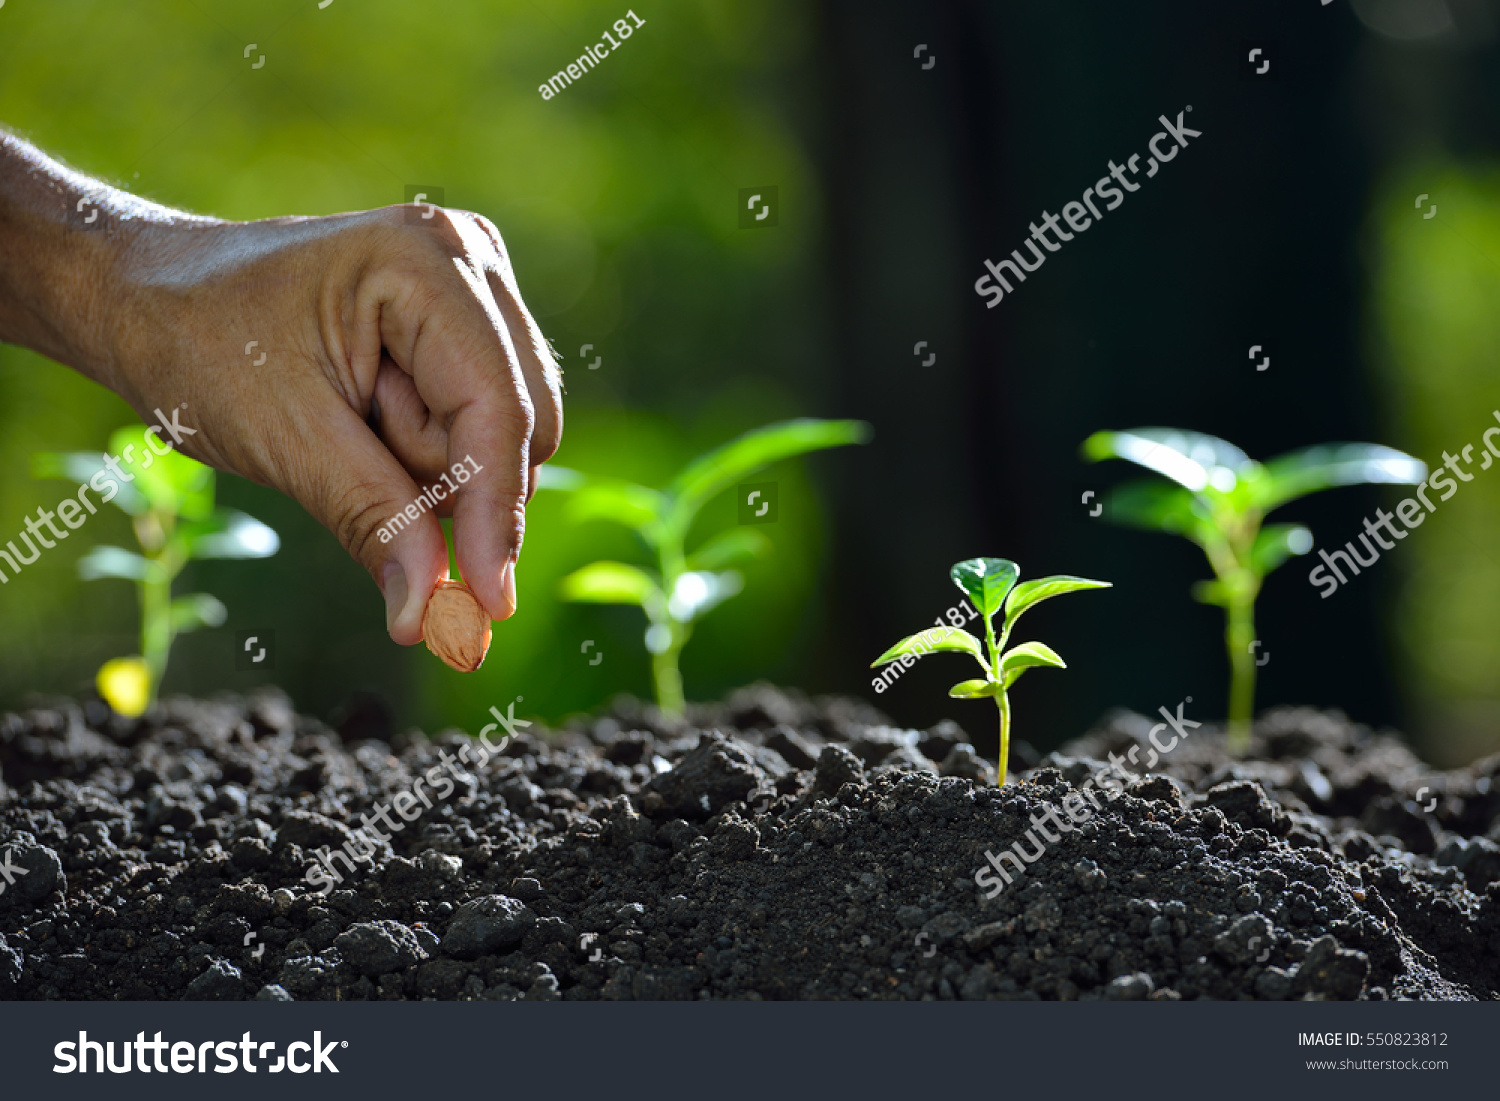 Farmer's hand planting a seed in soil #550823812